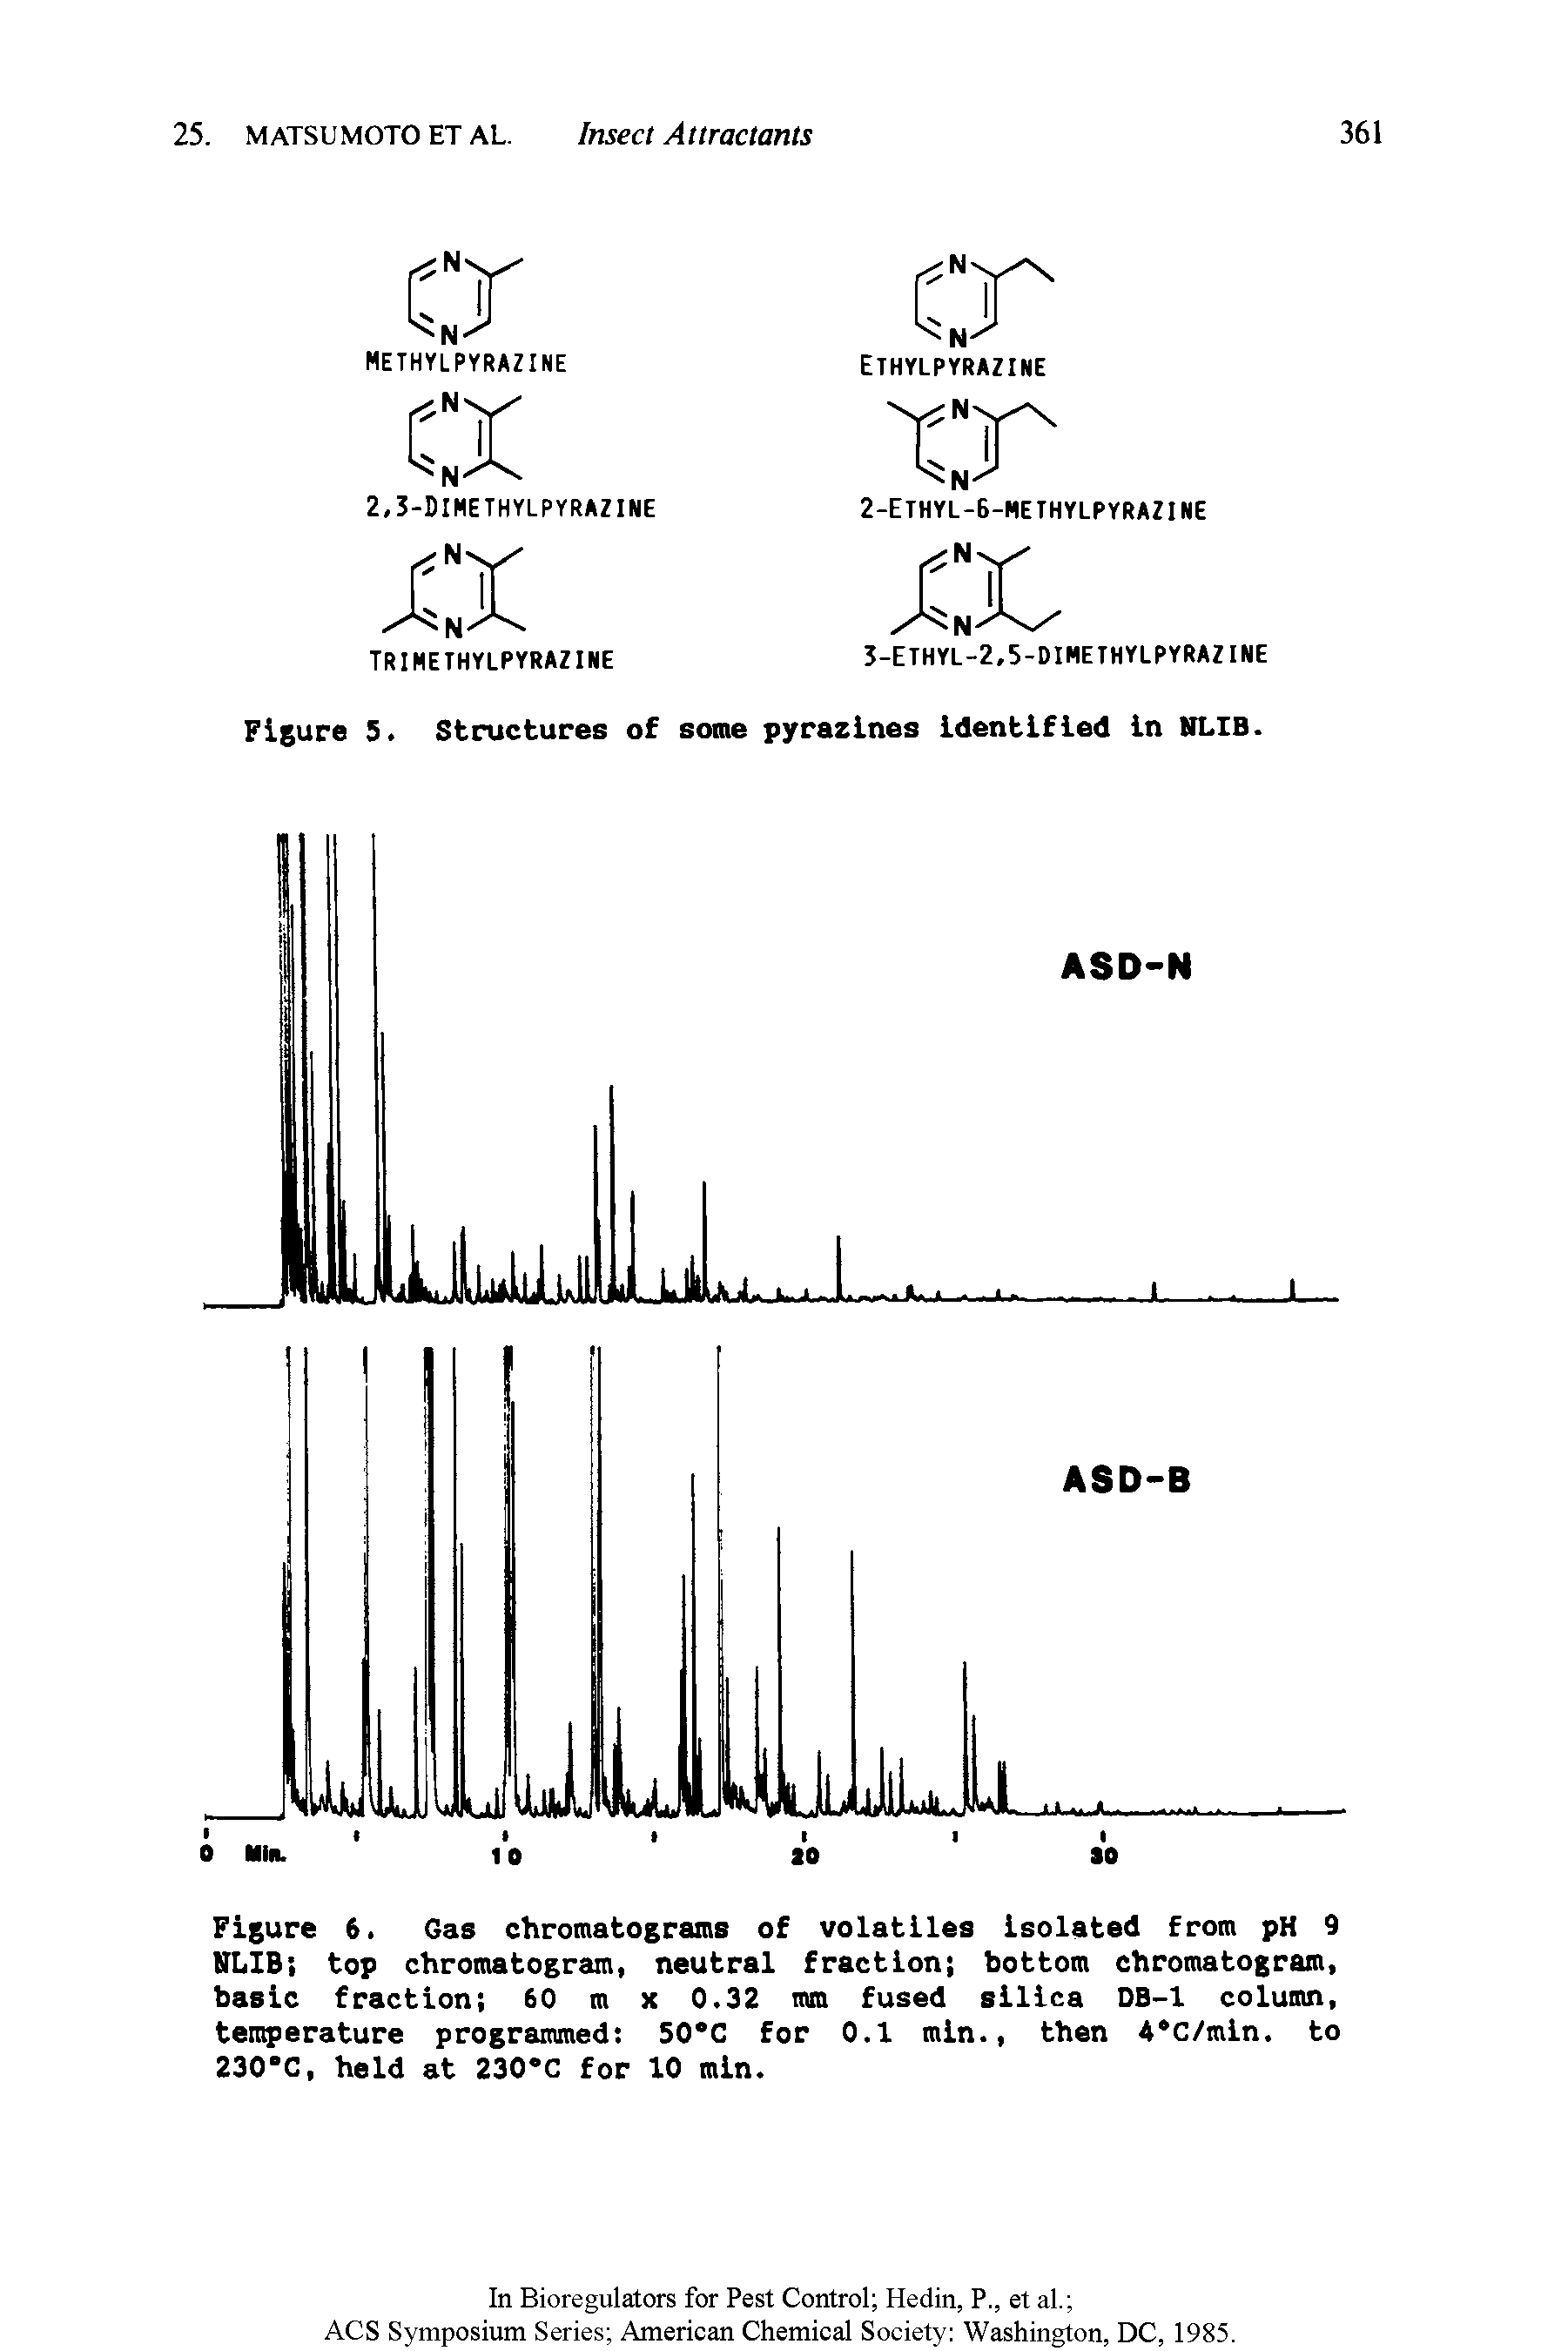 Figure 6. Gas chromatograms of volatiles isolated from pH 9 NLIB top chromatogram, neutral fraction bottom chromatogram, basic fraction 60 m x 0.32 mm fused silica DB-1 column, temperature programmed 50°C for 0.1 min., then 4 C/mln. to 230-C, held at 230 C for 10 min.